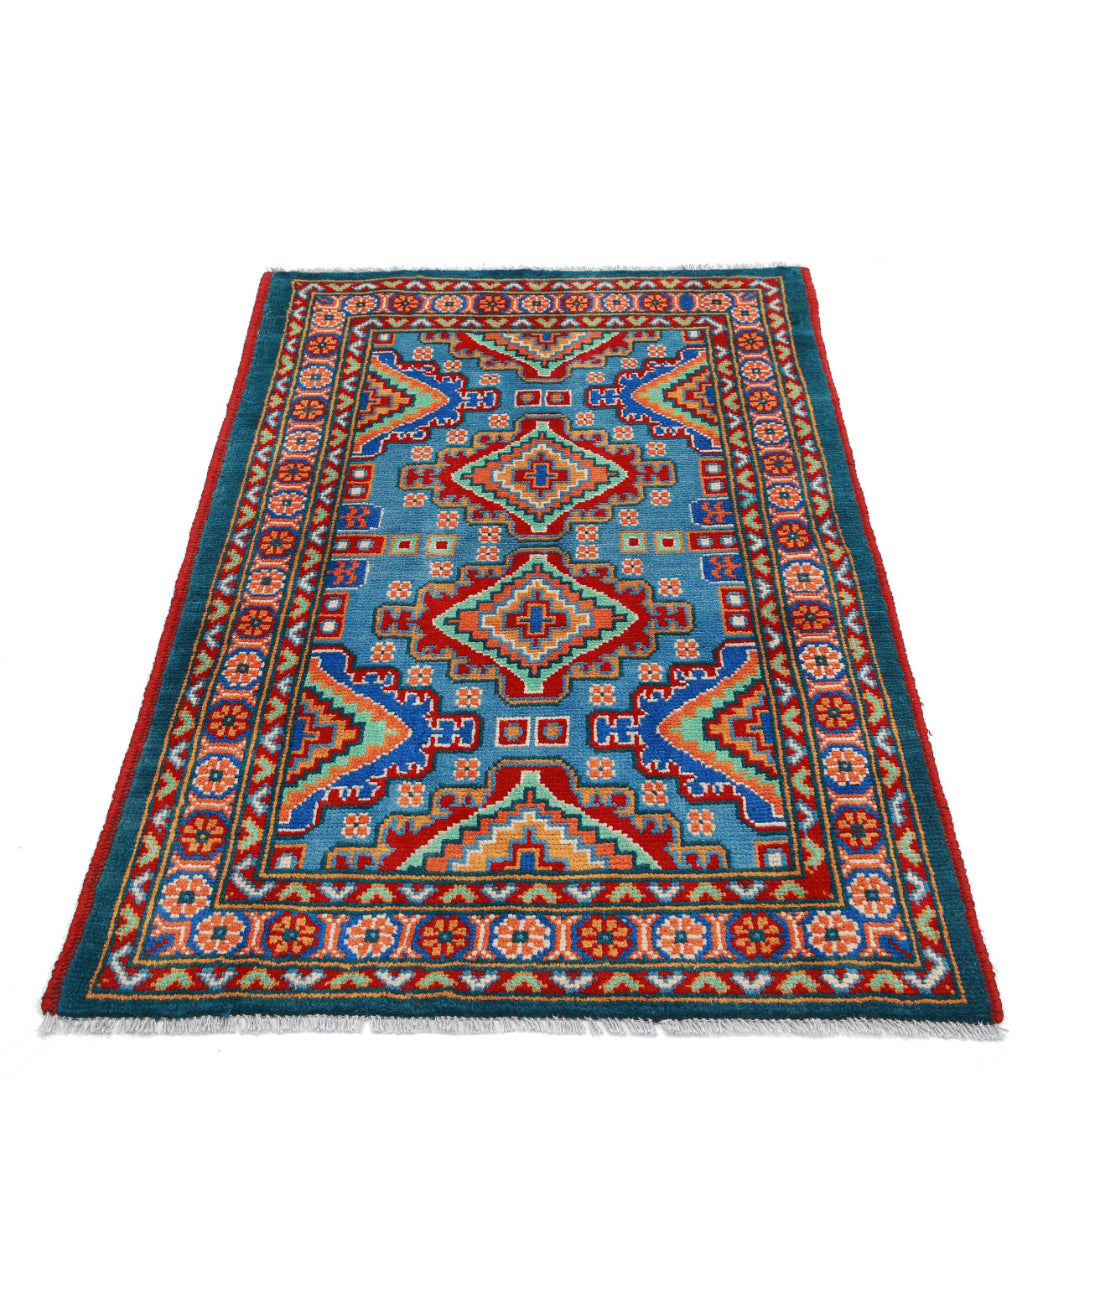 Revival 3'3'' X 4'10'' Hand-Knotted Wool Rug 3'3'' x 4'10'' (98 X 145) / Blue / Red